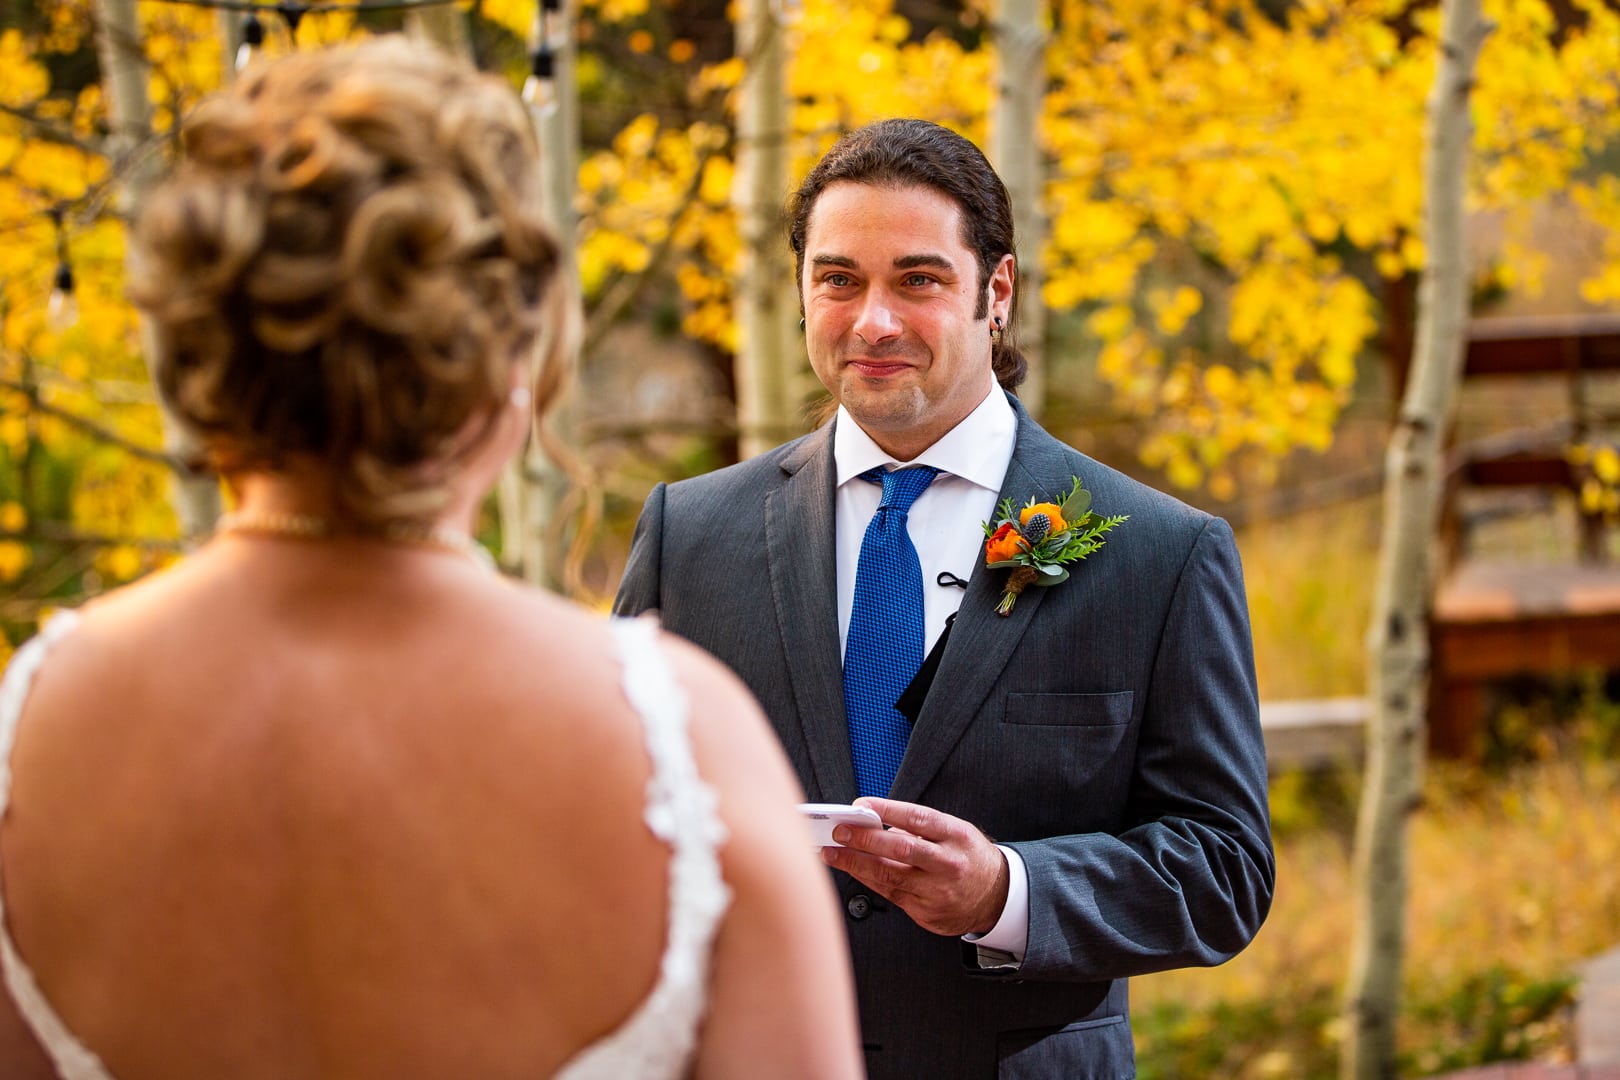 A groom reads his hand written vows at their colorado elopement ceremony.